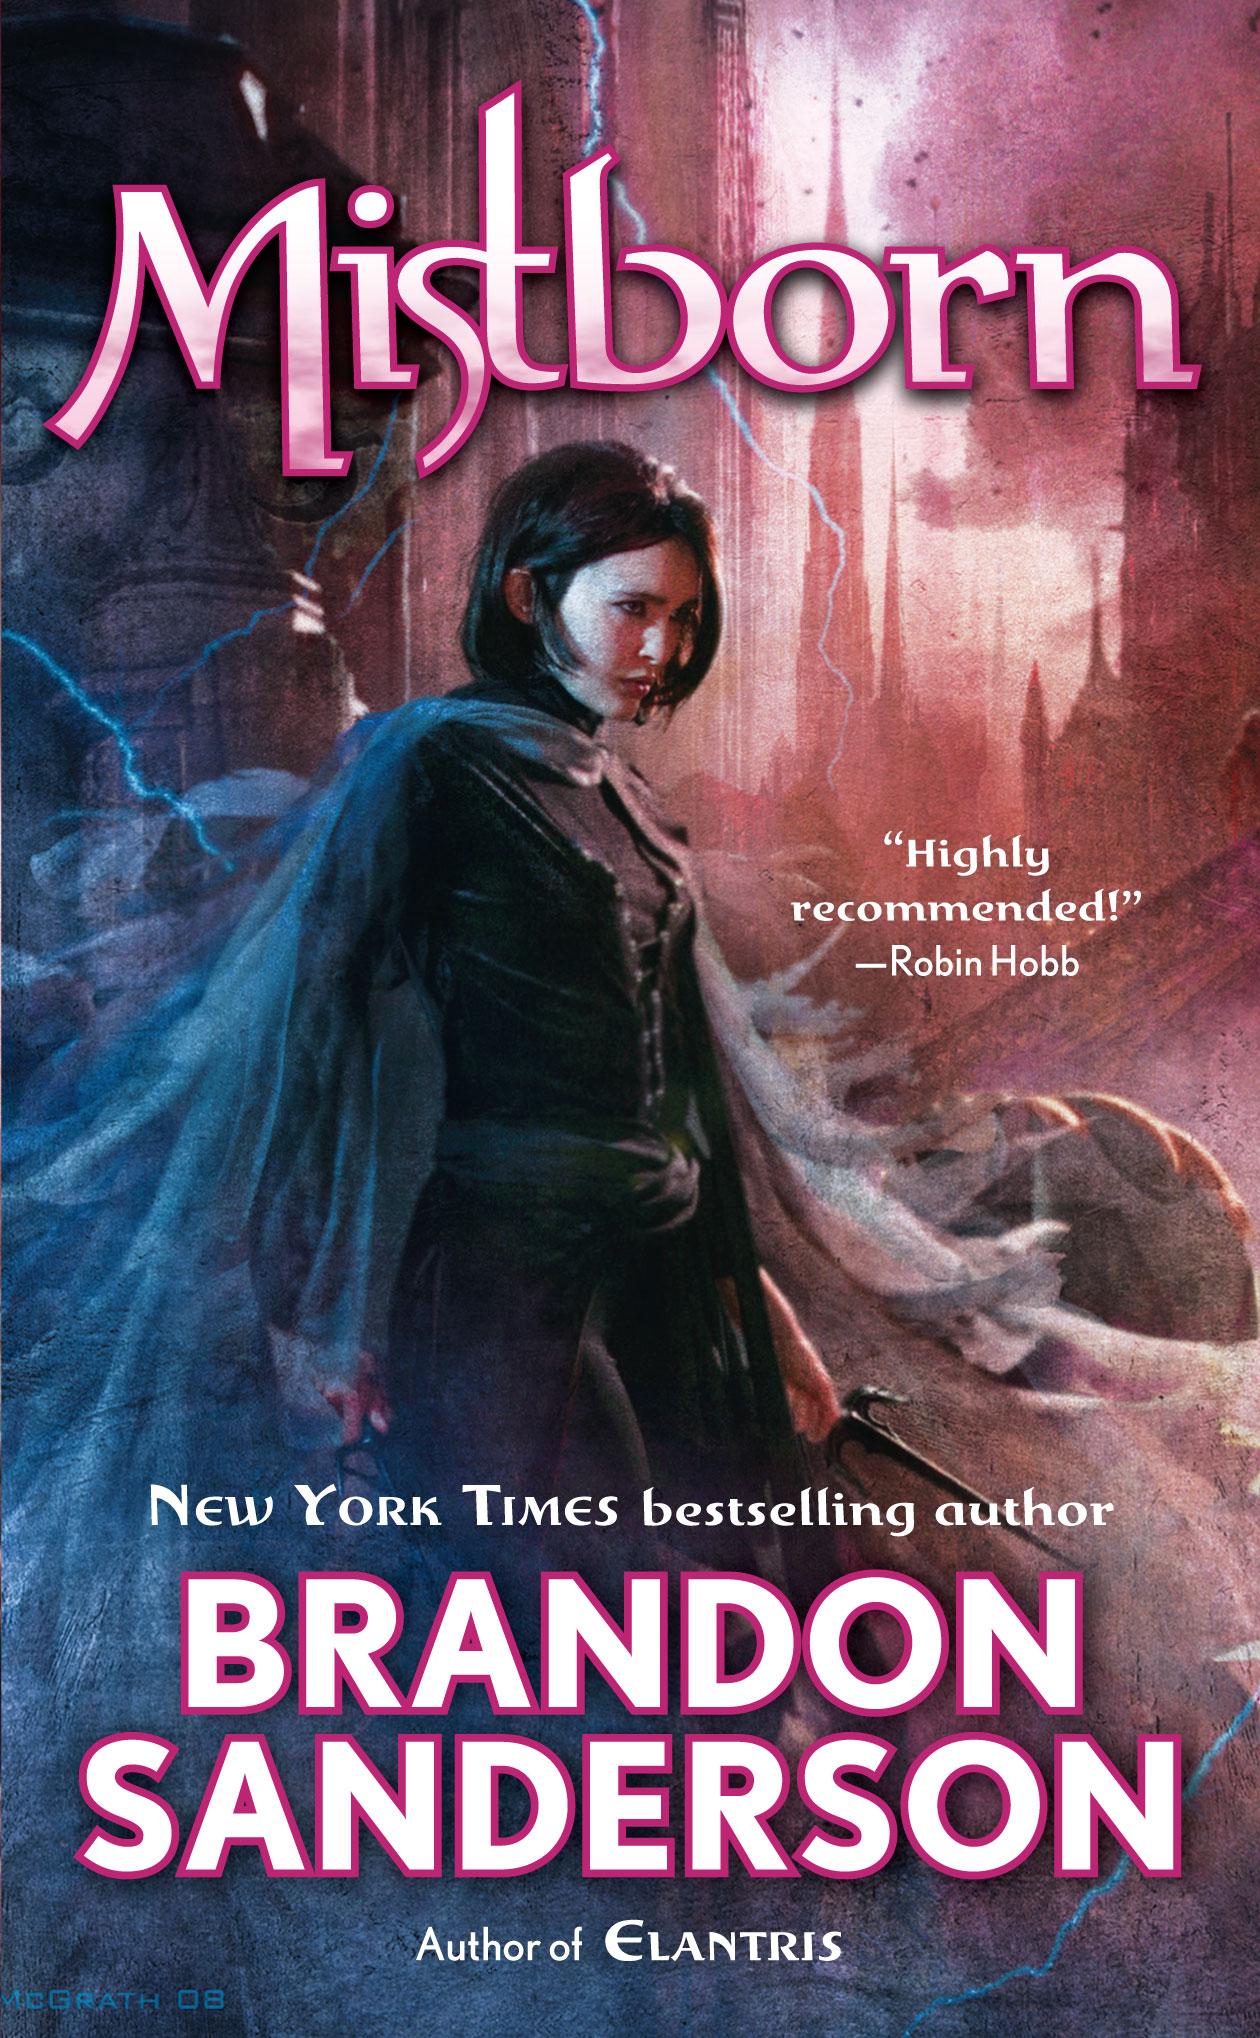 Mistborn, Brandon Sanderson, science fiction fantasy, SFF series, The Final Empire, SFF books, books, amreading, epic reads, good reads, must read,